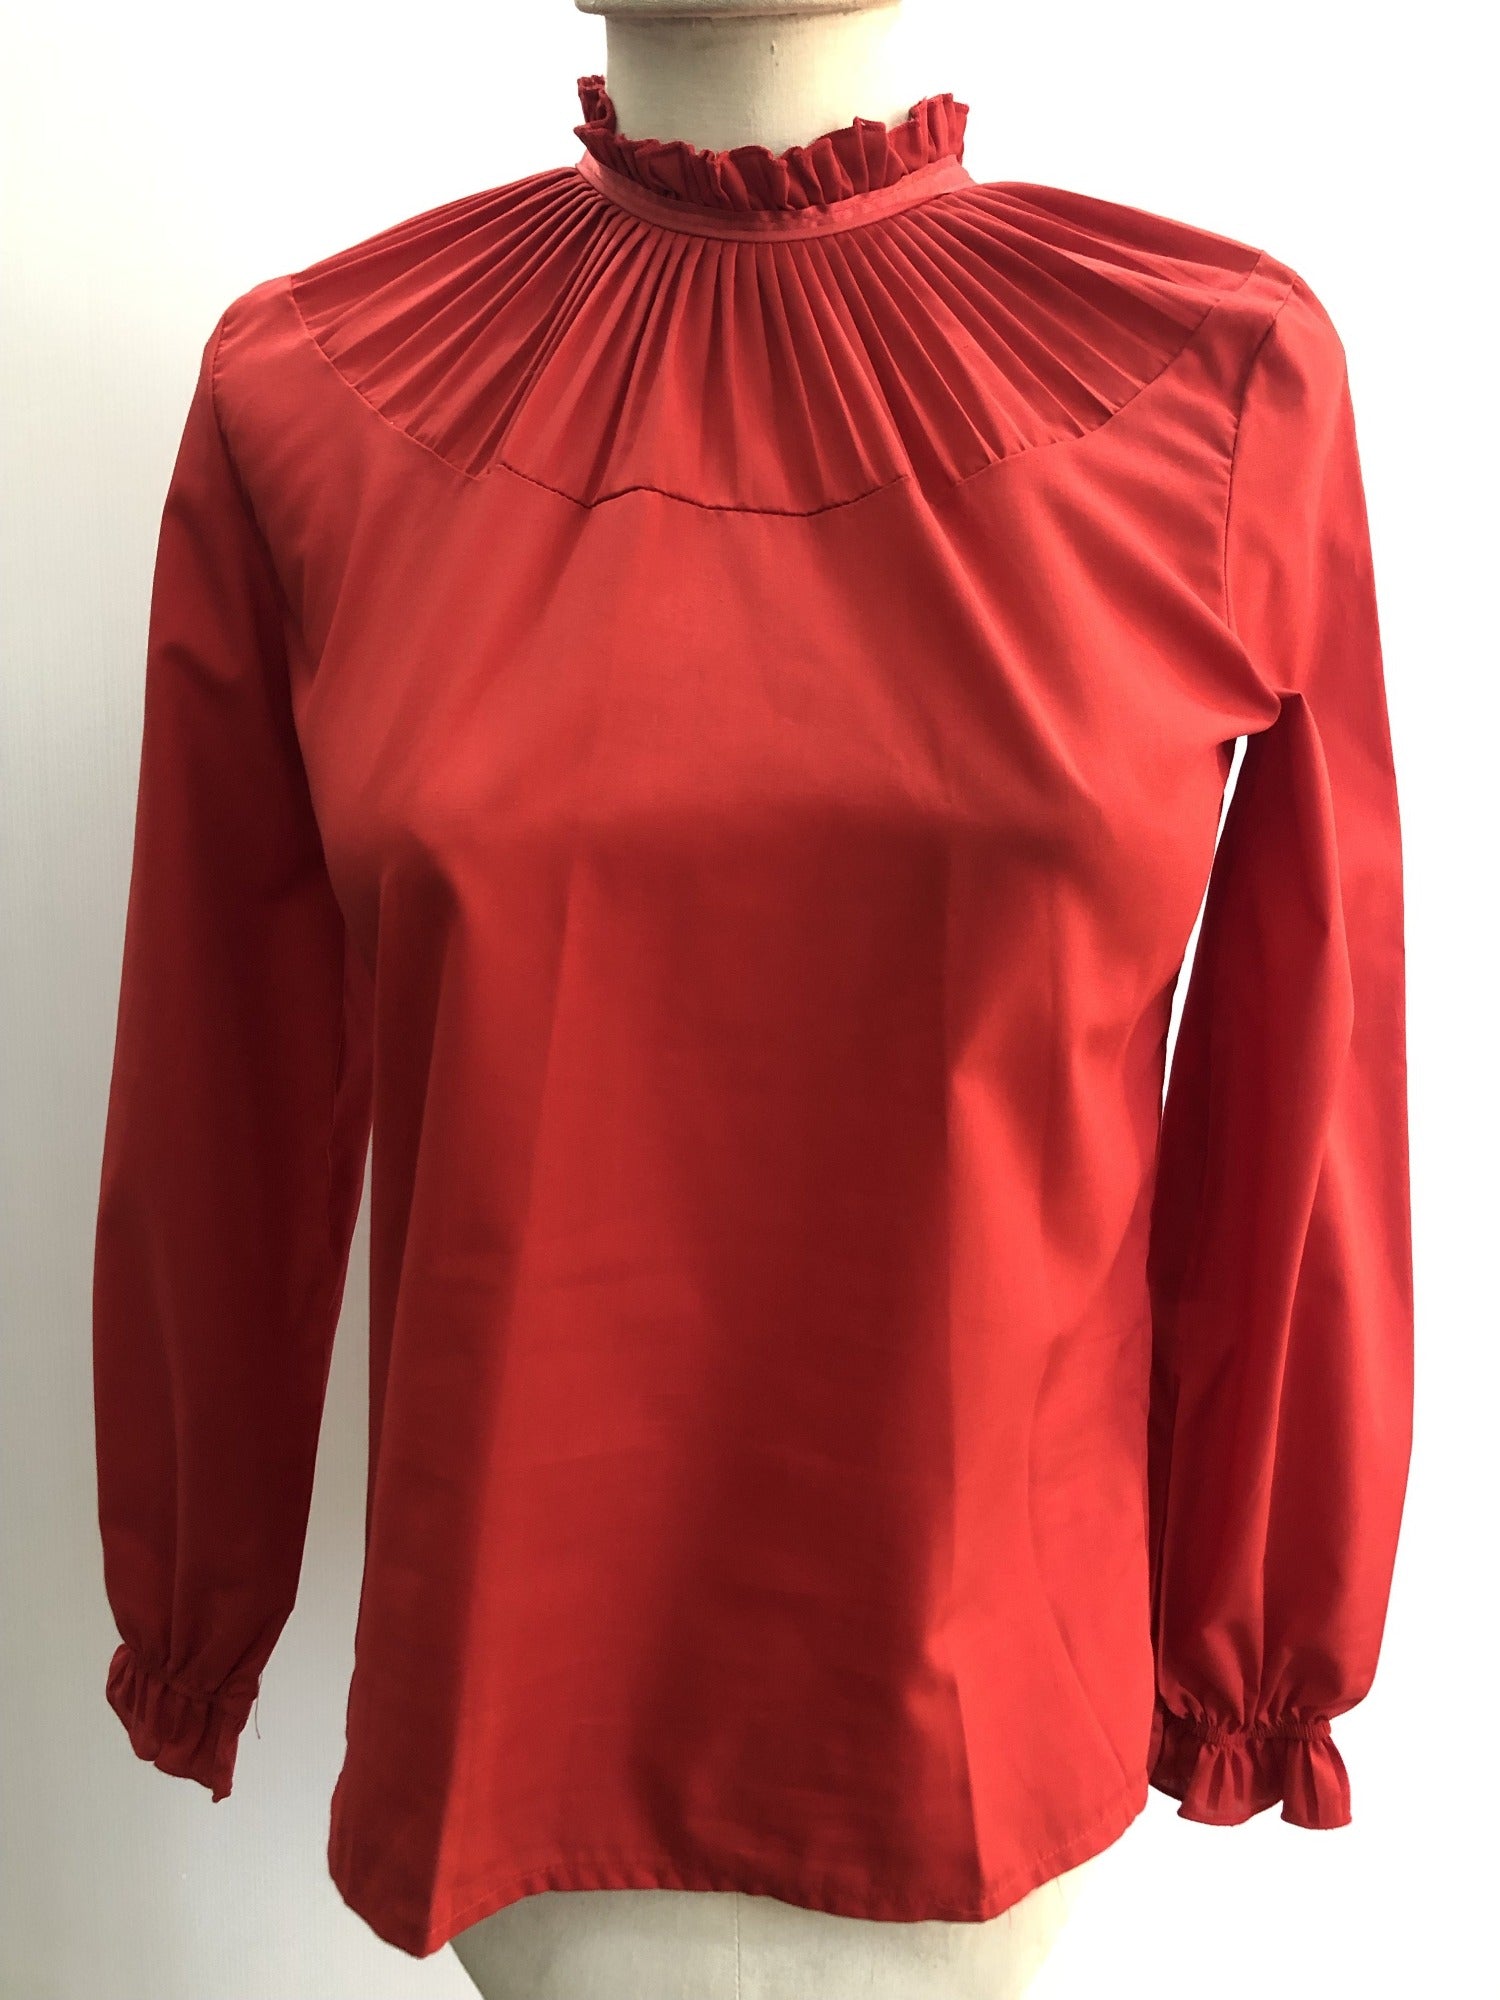 womens  vintage  Urban Village Vintage  top  ruffle sleeves  ruffle neck  red  high neck  blouse  beagle collar  70s  1970s  10